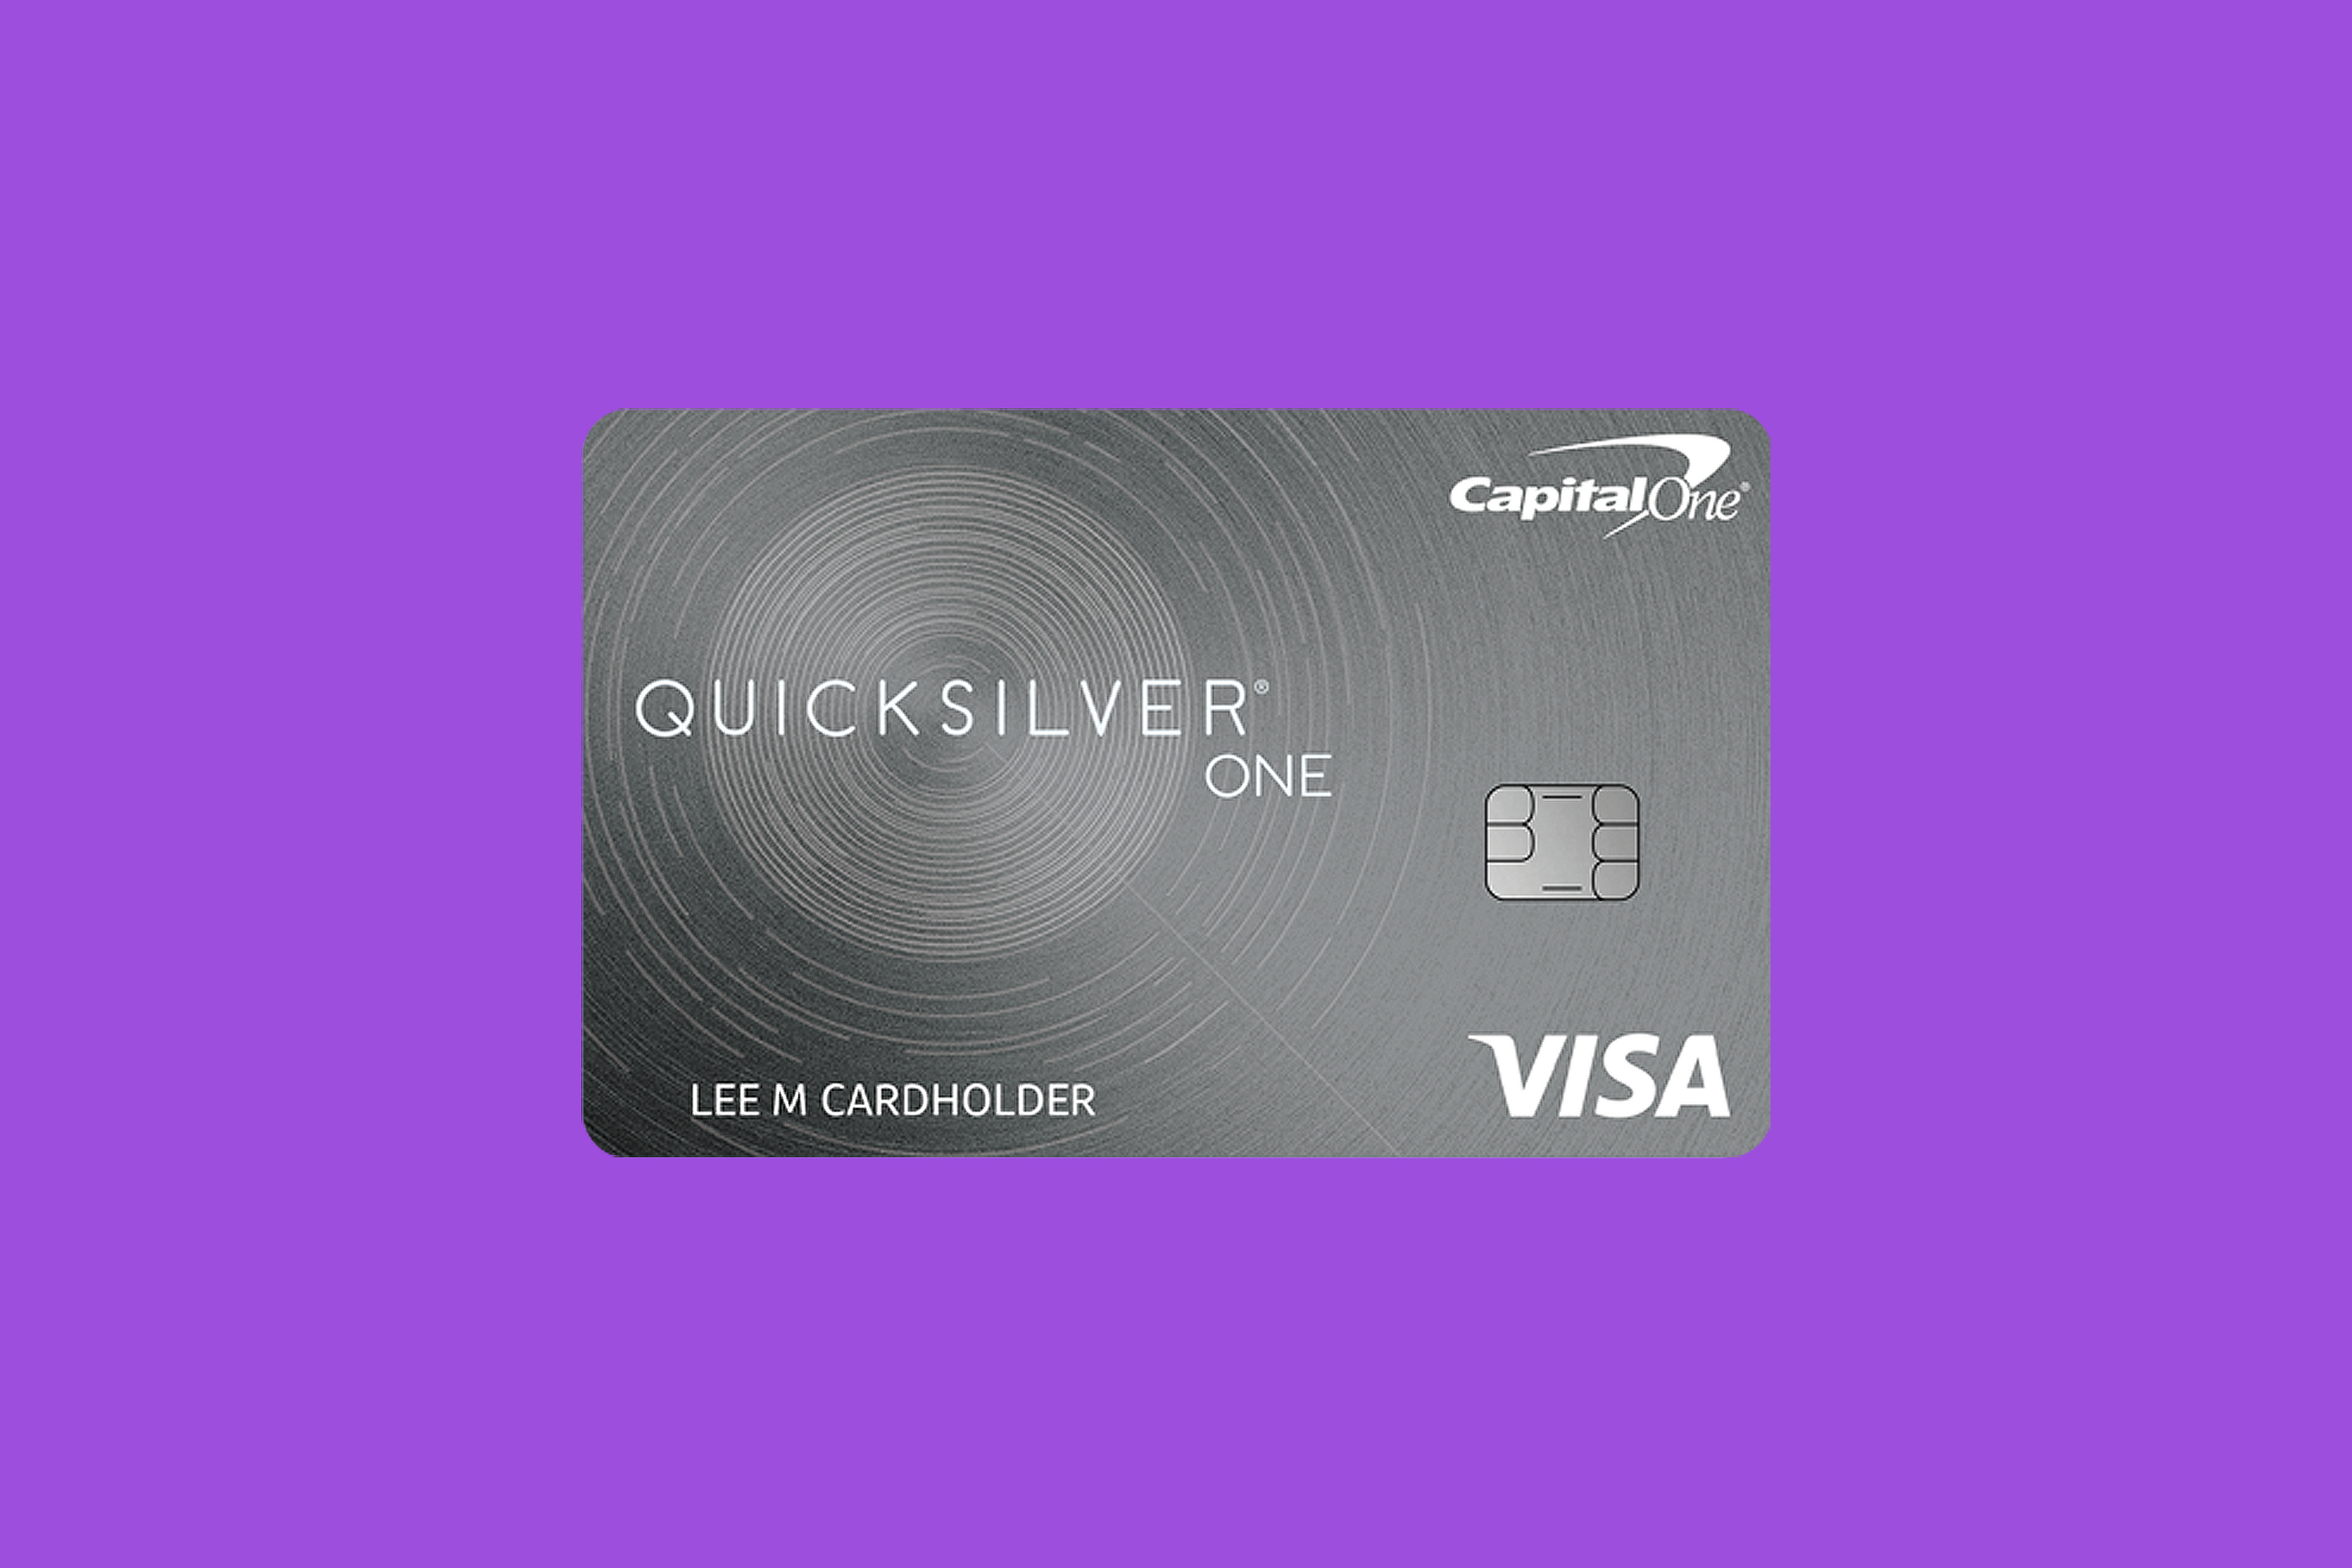 Quicksilver One Credit Card From Capital One Review Money